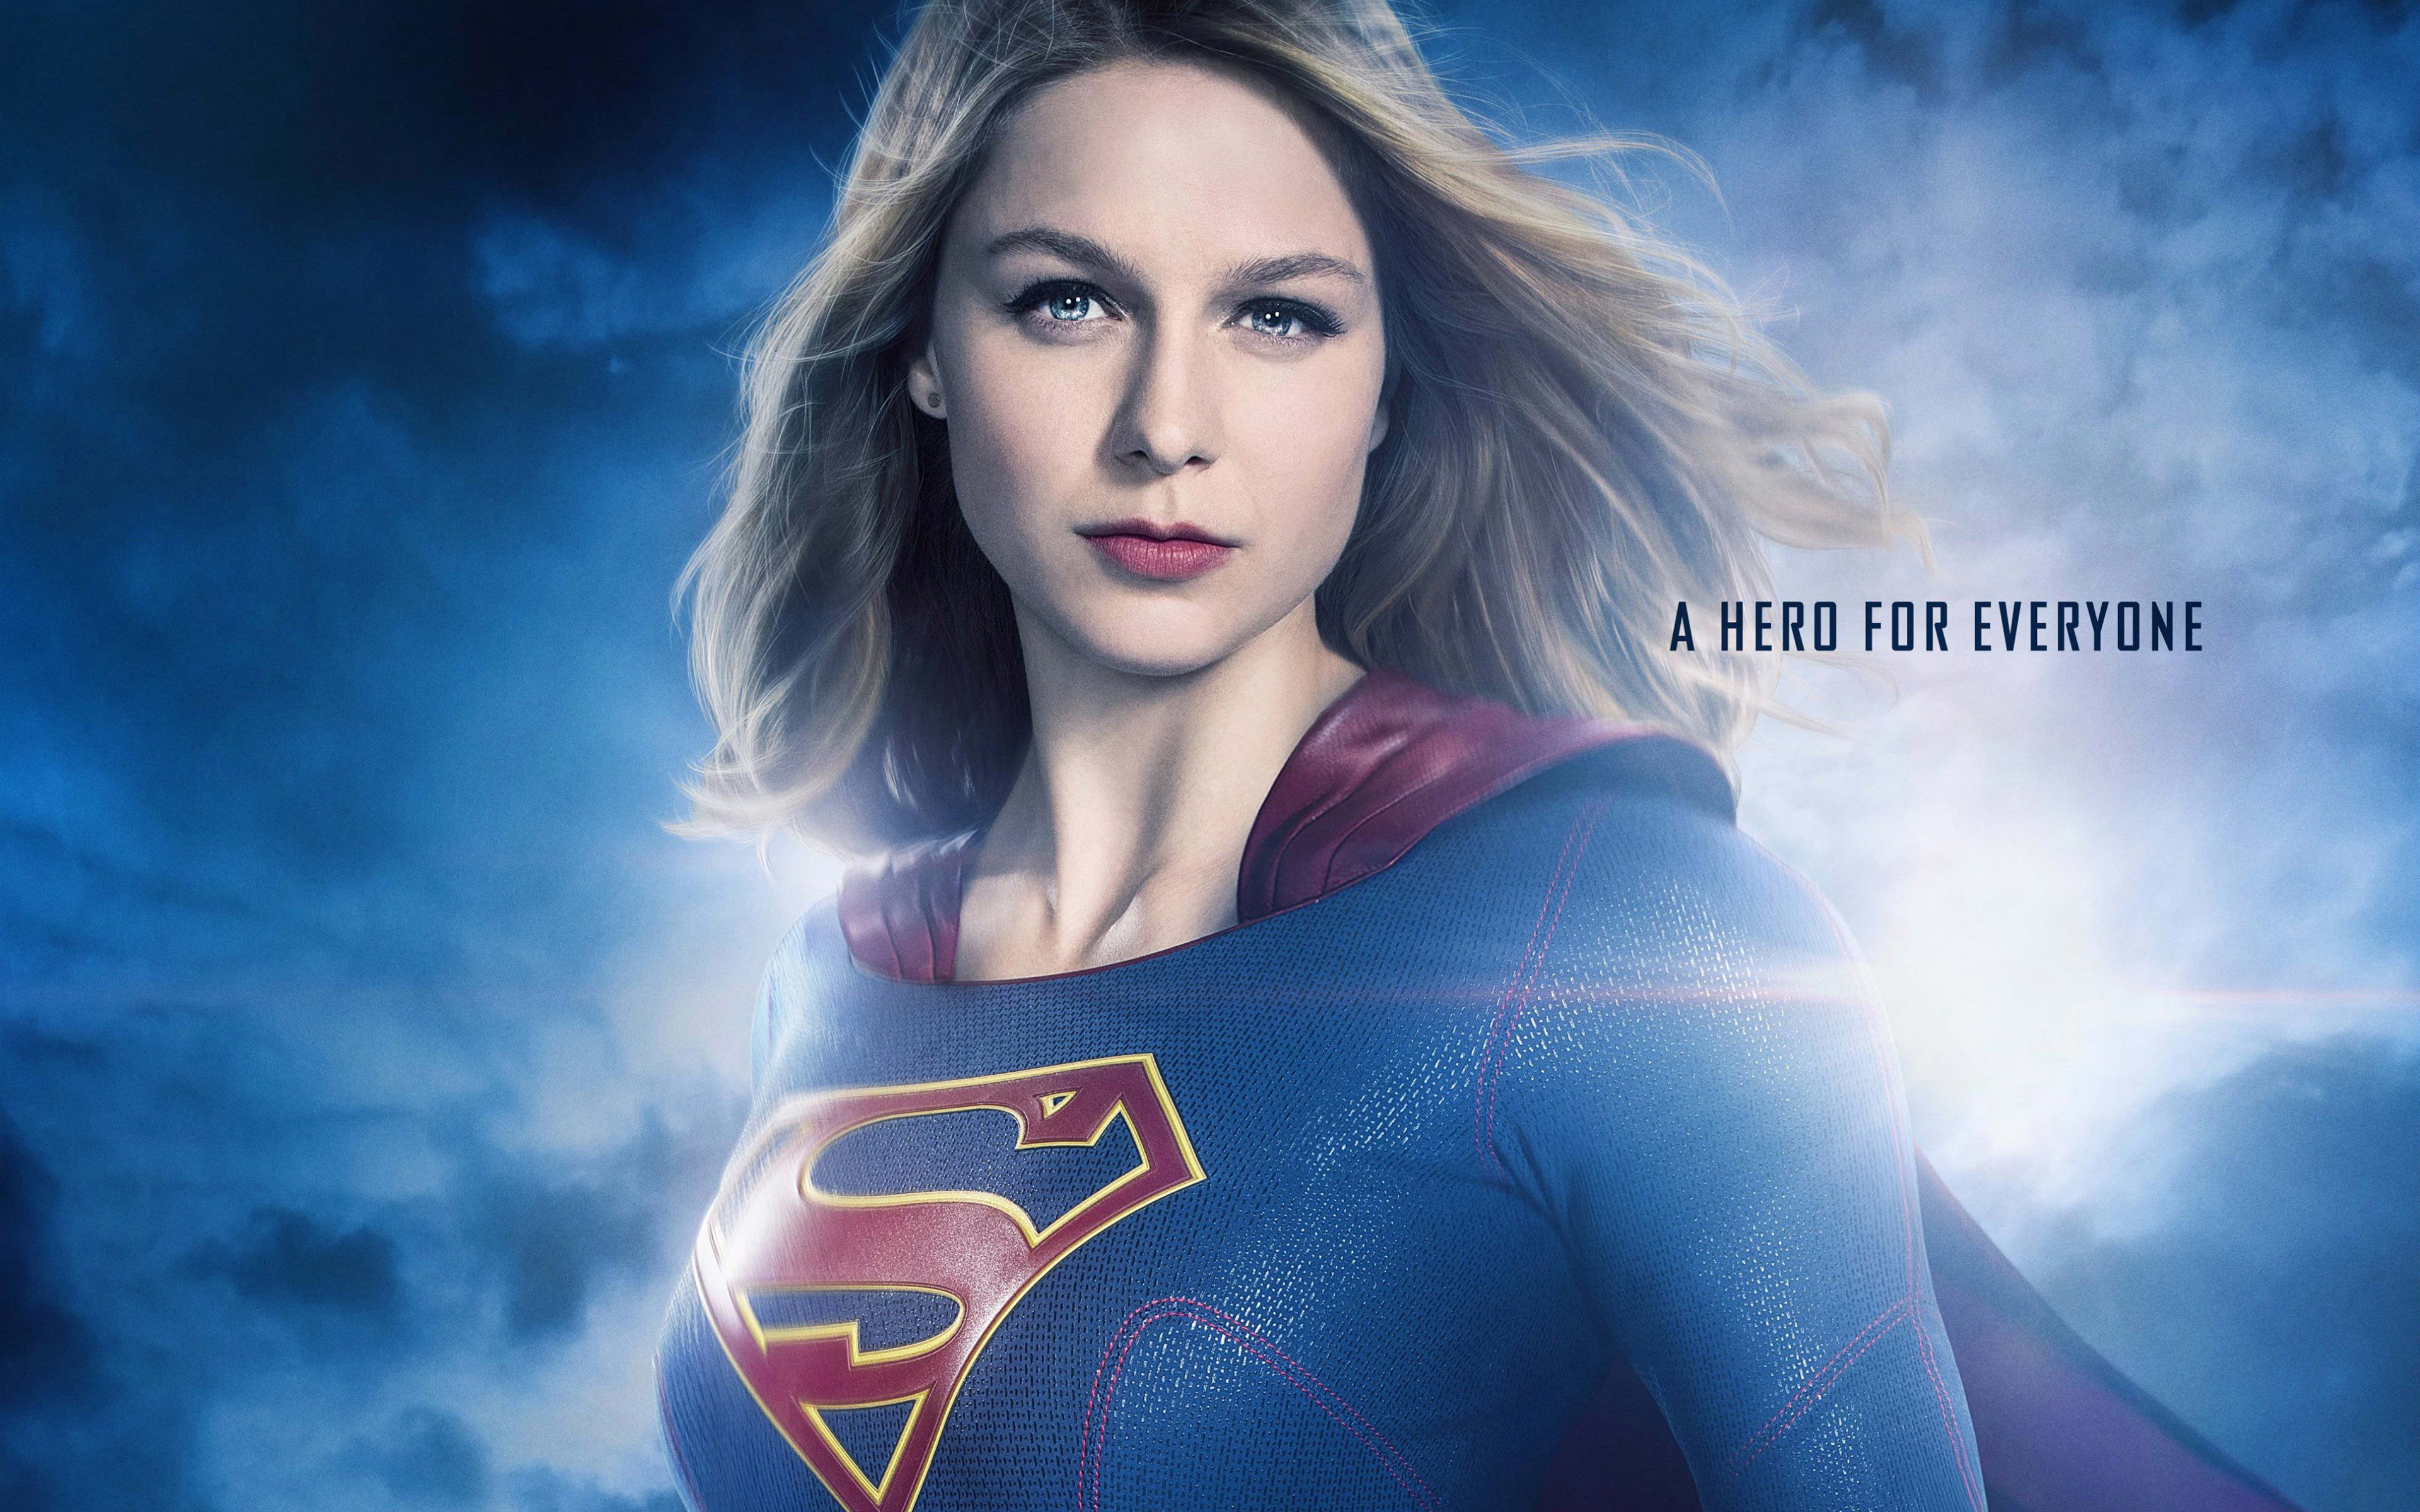 Supergirl 4k Wallpapers For Your Desktop Or Mobile Screen Free And Easy To Download